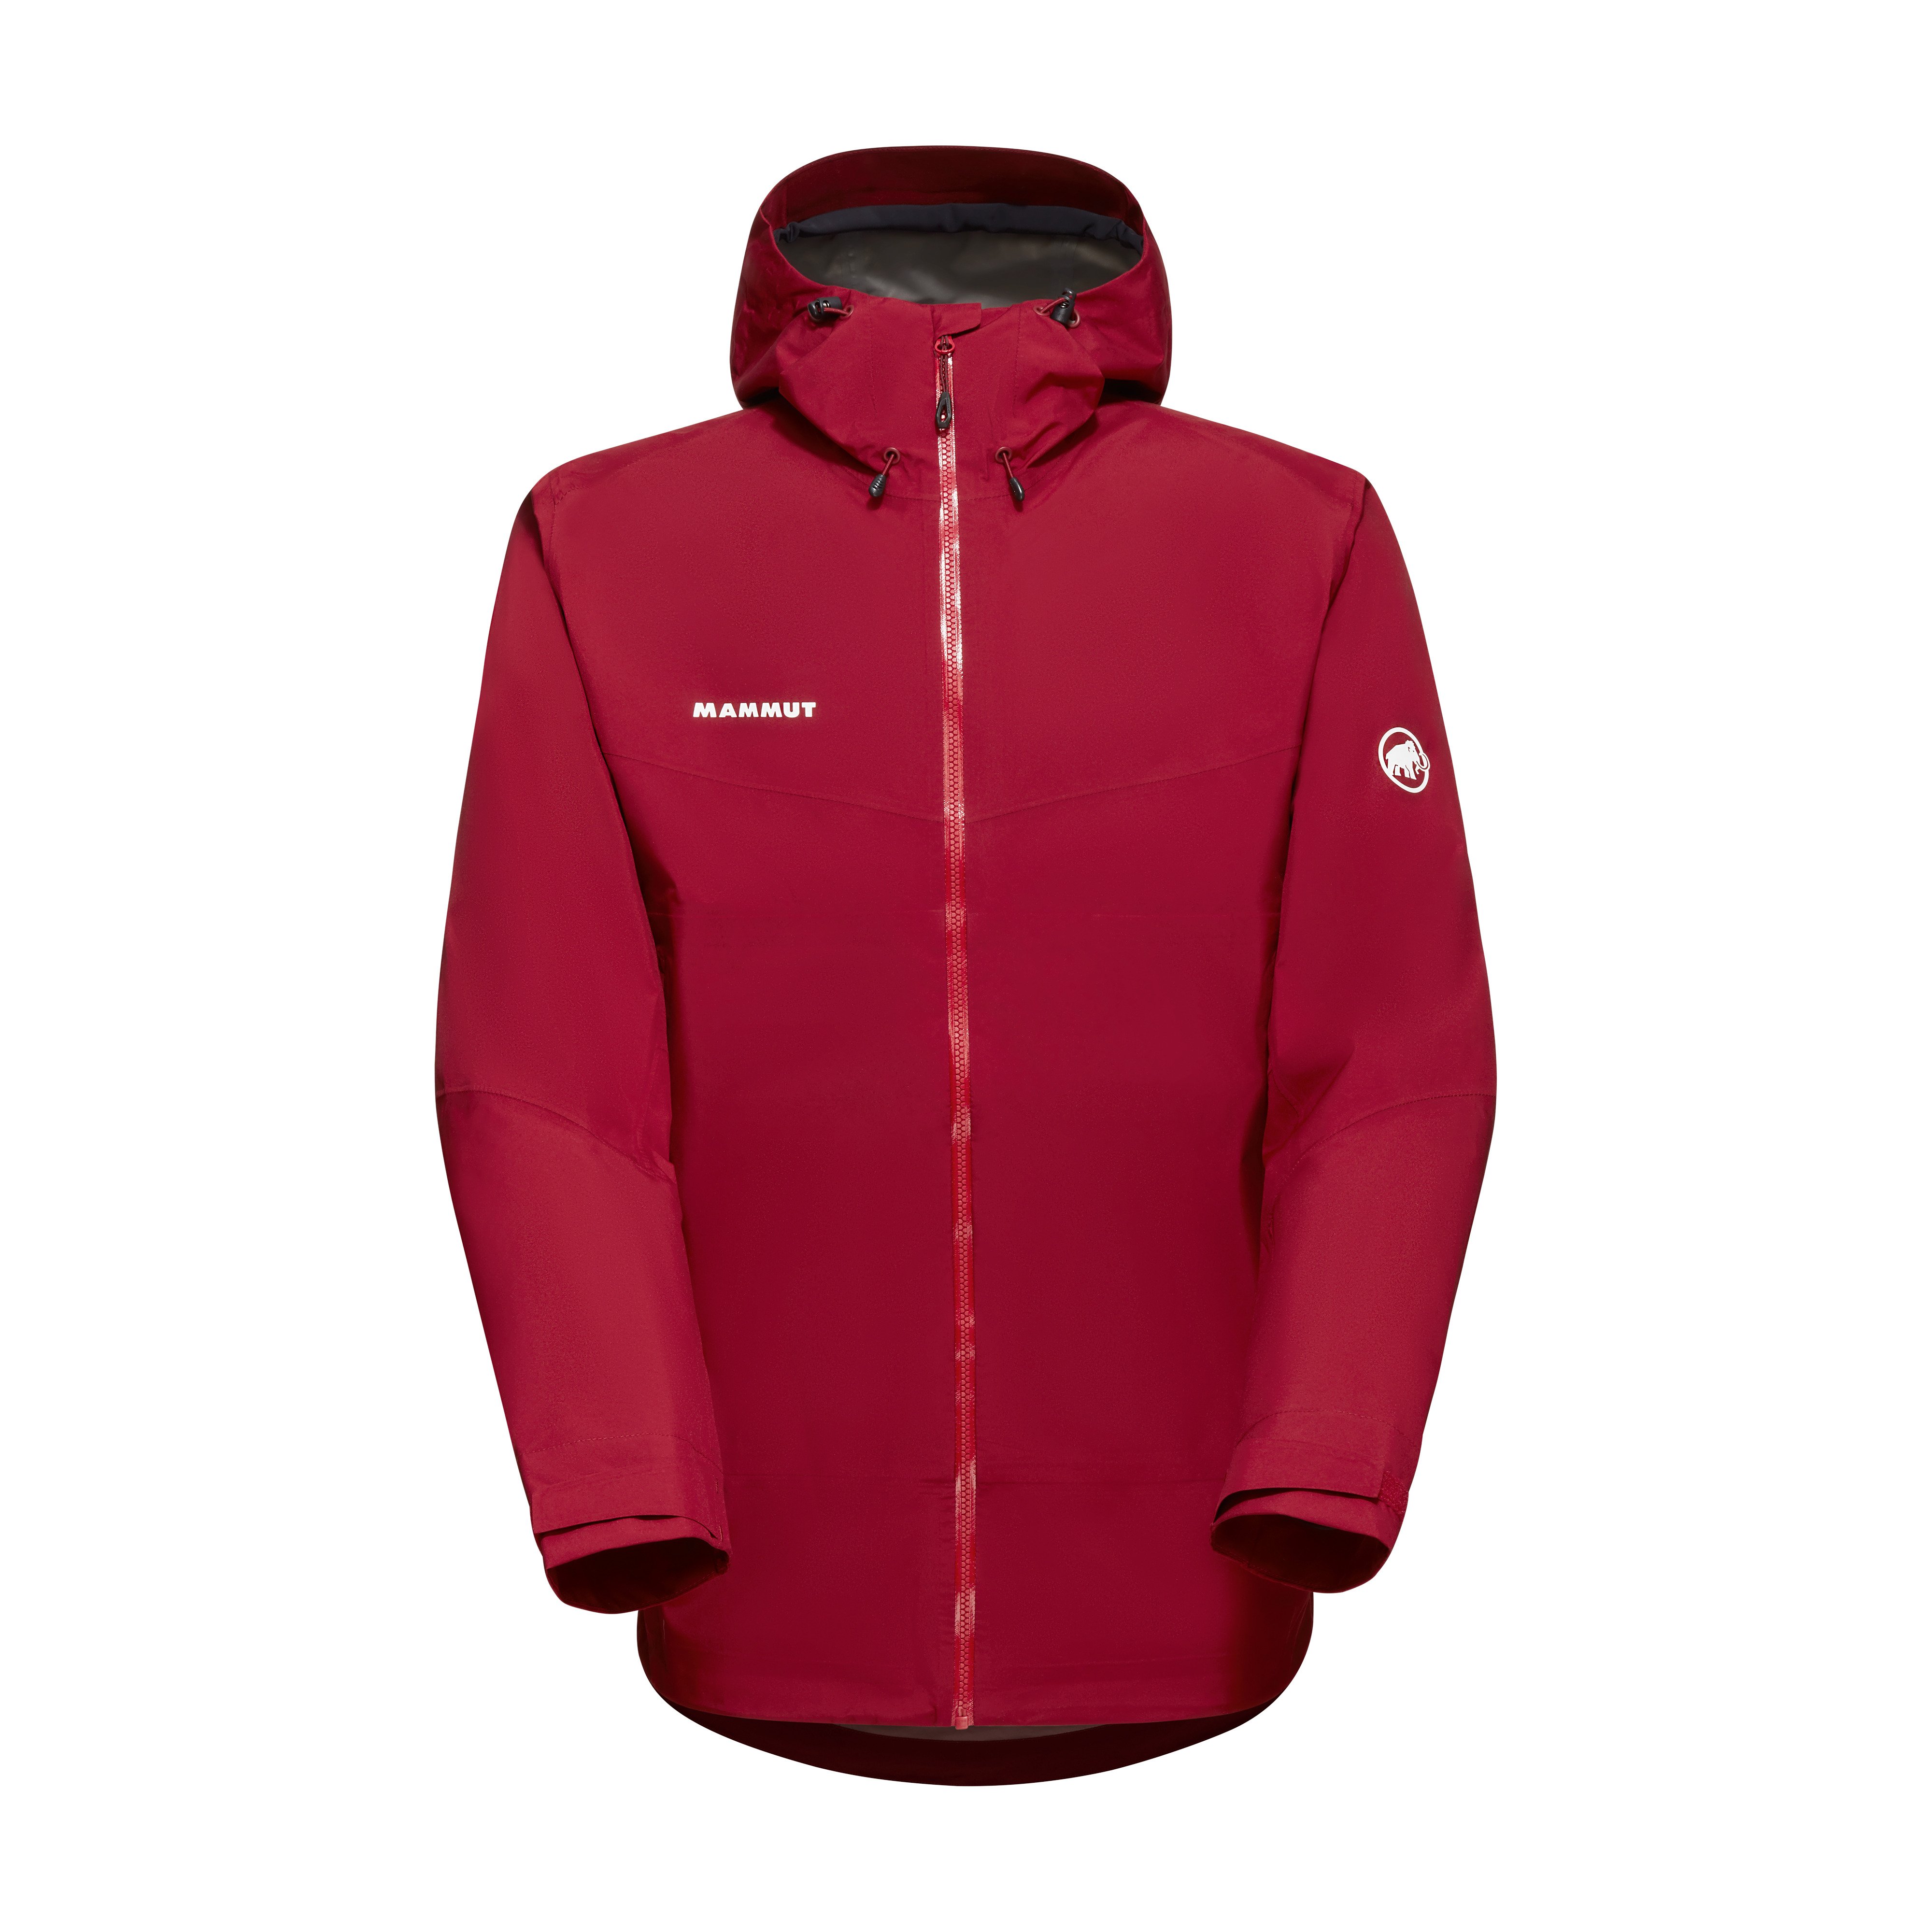 Convey Tour HS Hooded Jacket Men - blood red, S product image